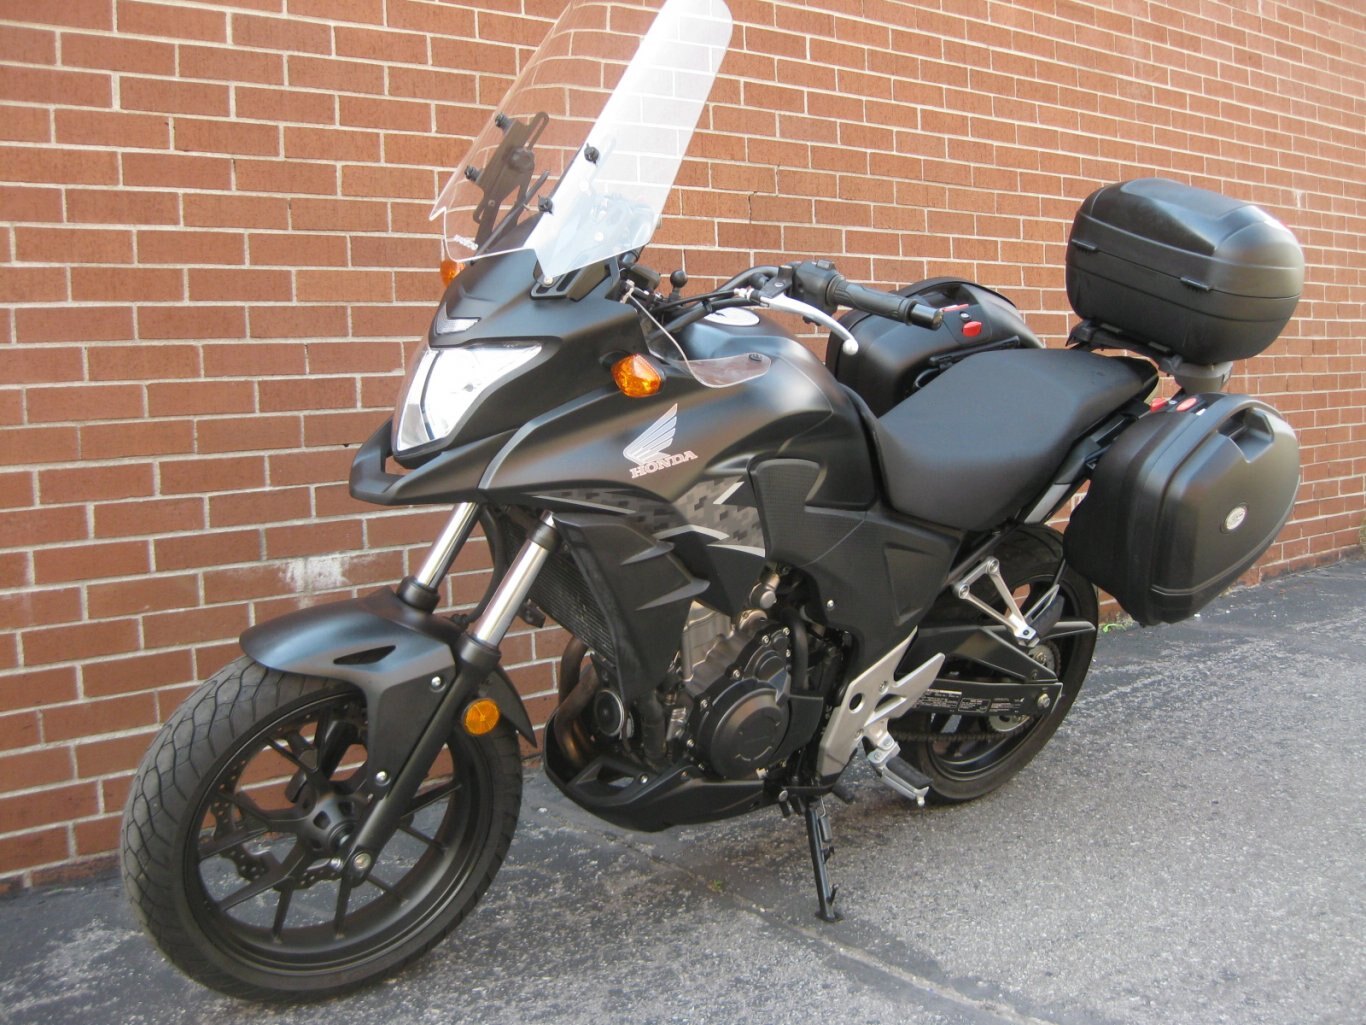 2013 Honda CB500X SOLD CONGRATULATIONS TALHA WELCOME TO THE WORLD OF TWO WHEELED ADVENTURE!